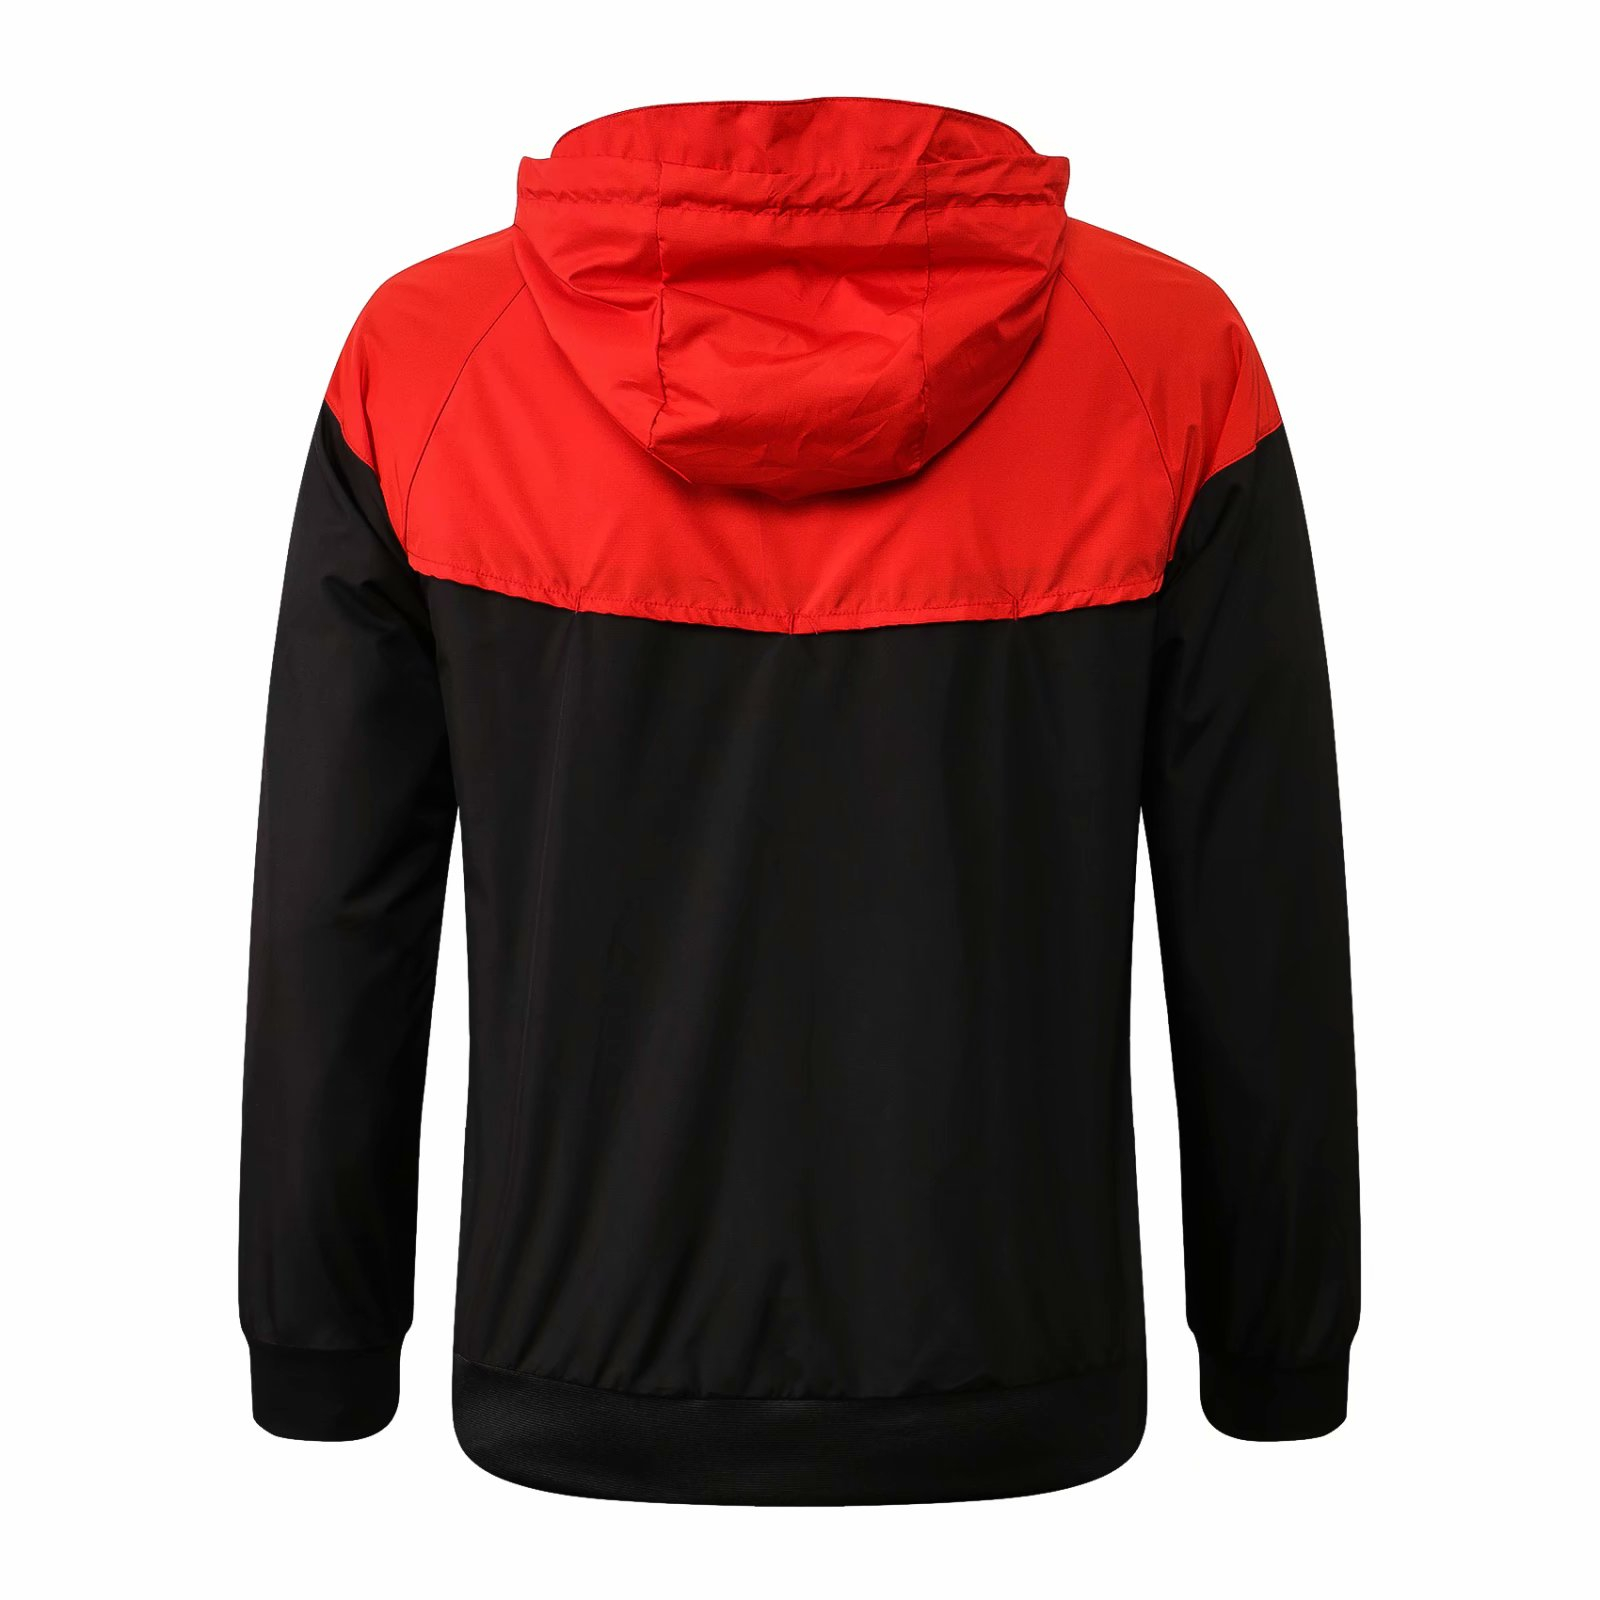 Liverpool 2021/22 Red/Black All Weather Windrunner Jacket Mens